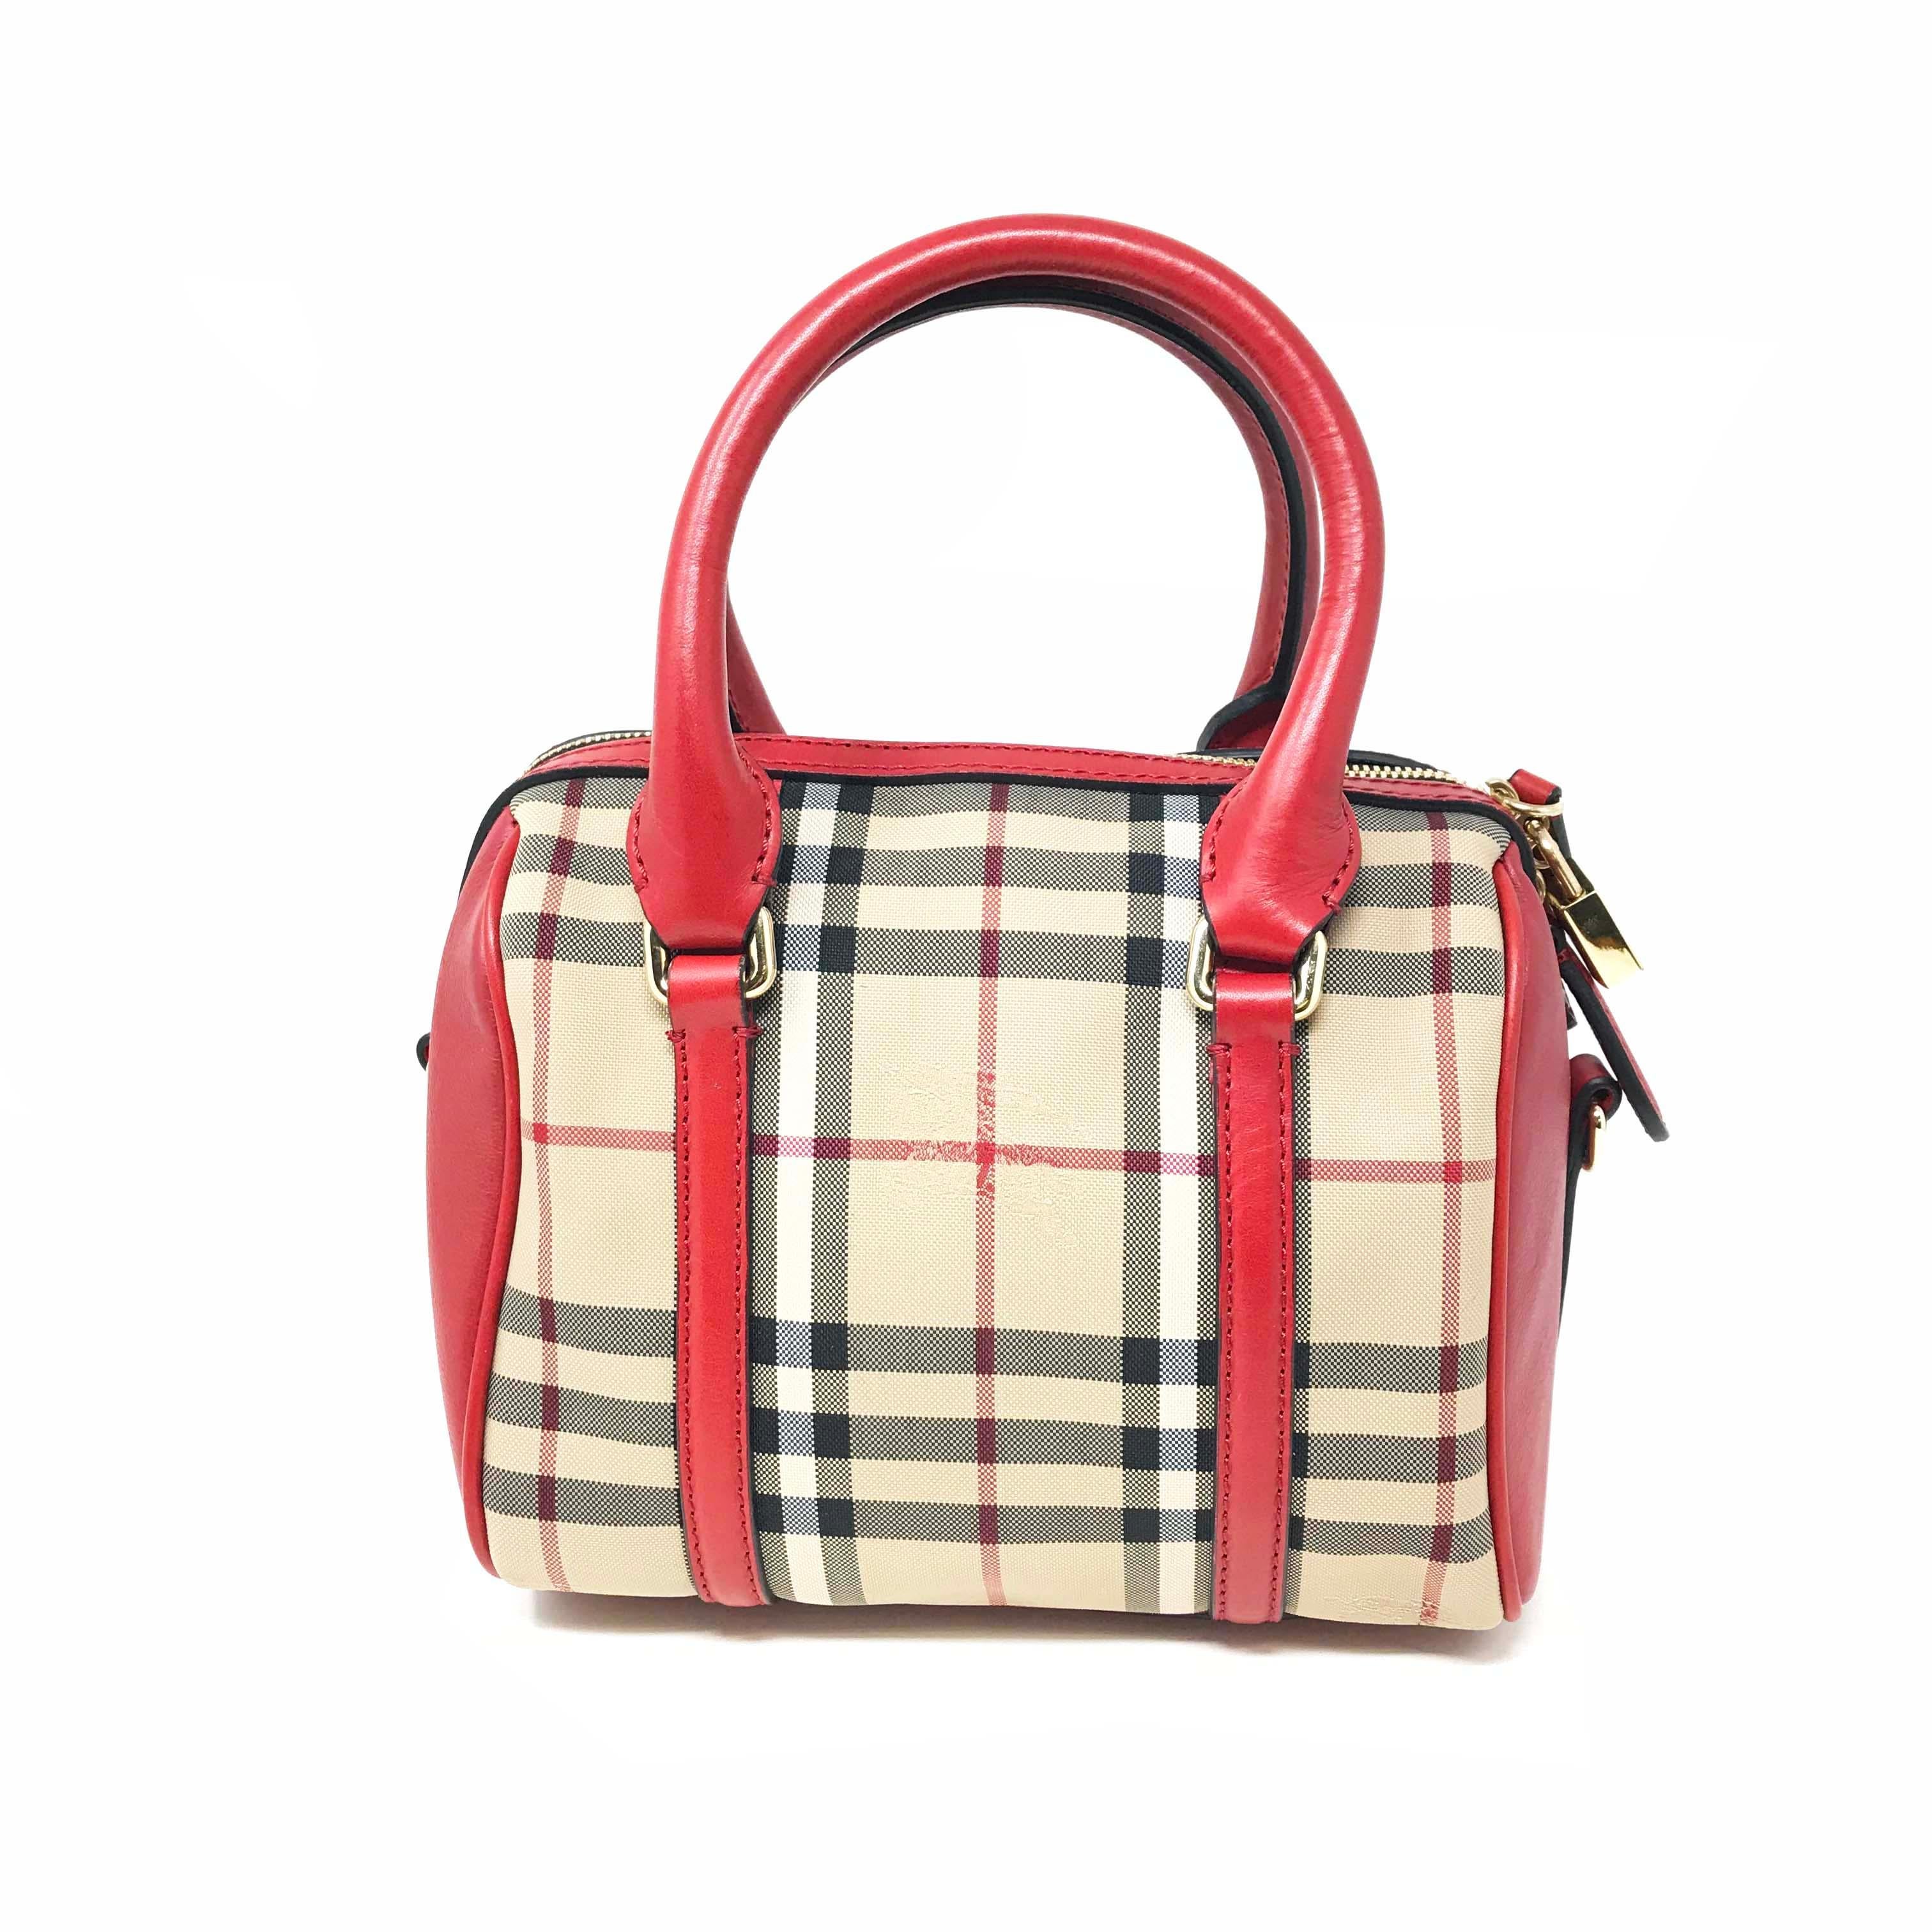 This is new with defects Burberry 3925930 Small Alchester Beige Red Ladies Handbag Purse. Signature check print bowler with Equestrian Knight detail, removable adjustable shoulder strap, made in Italy. This handbag opens with a zipper, has one